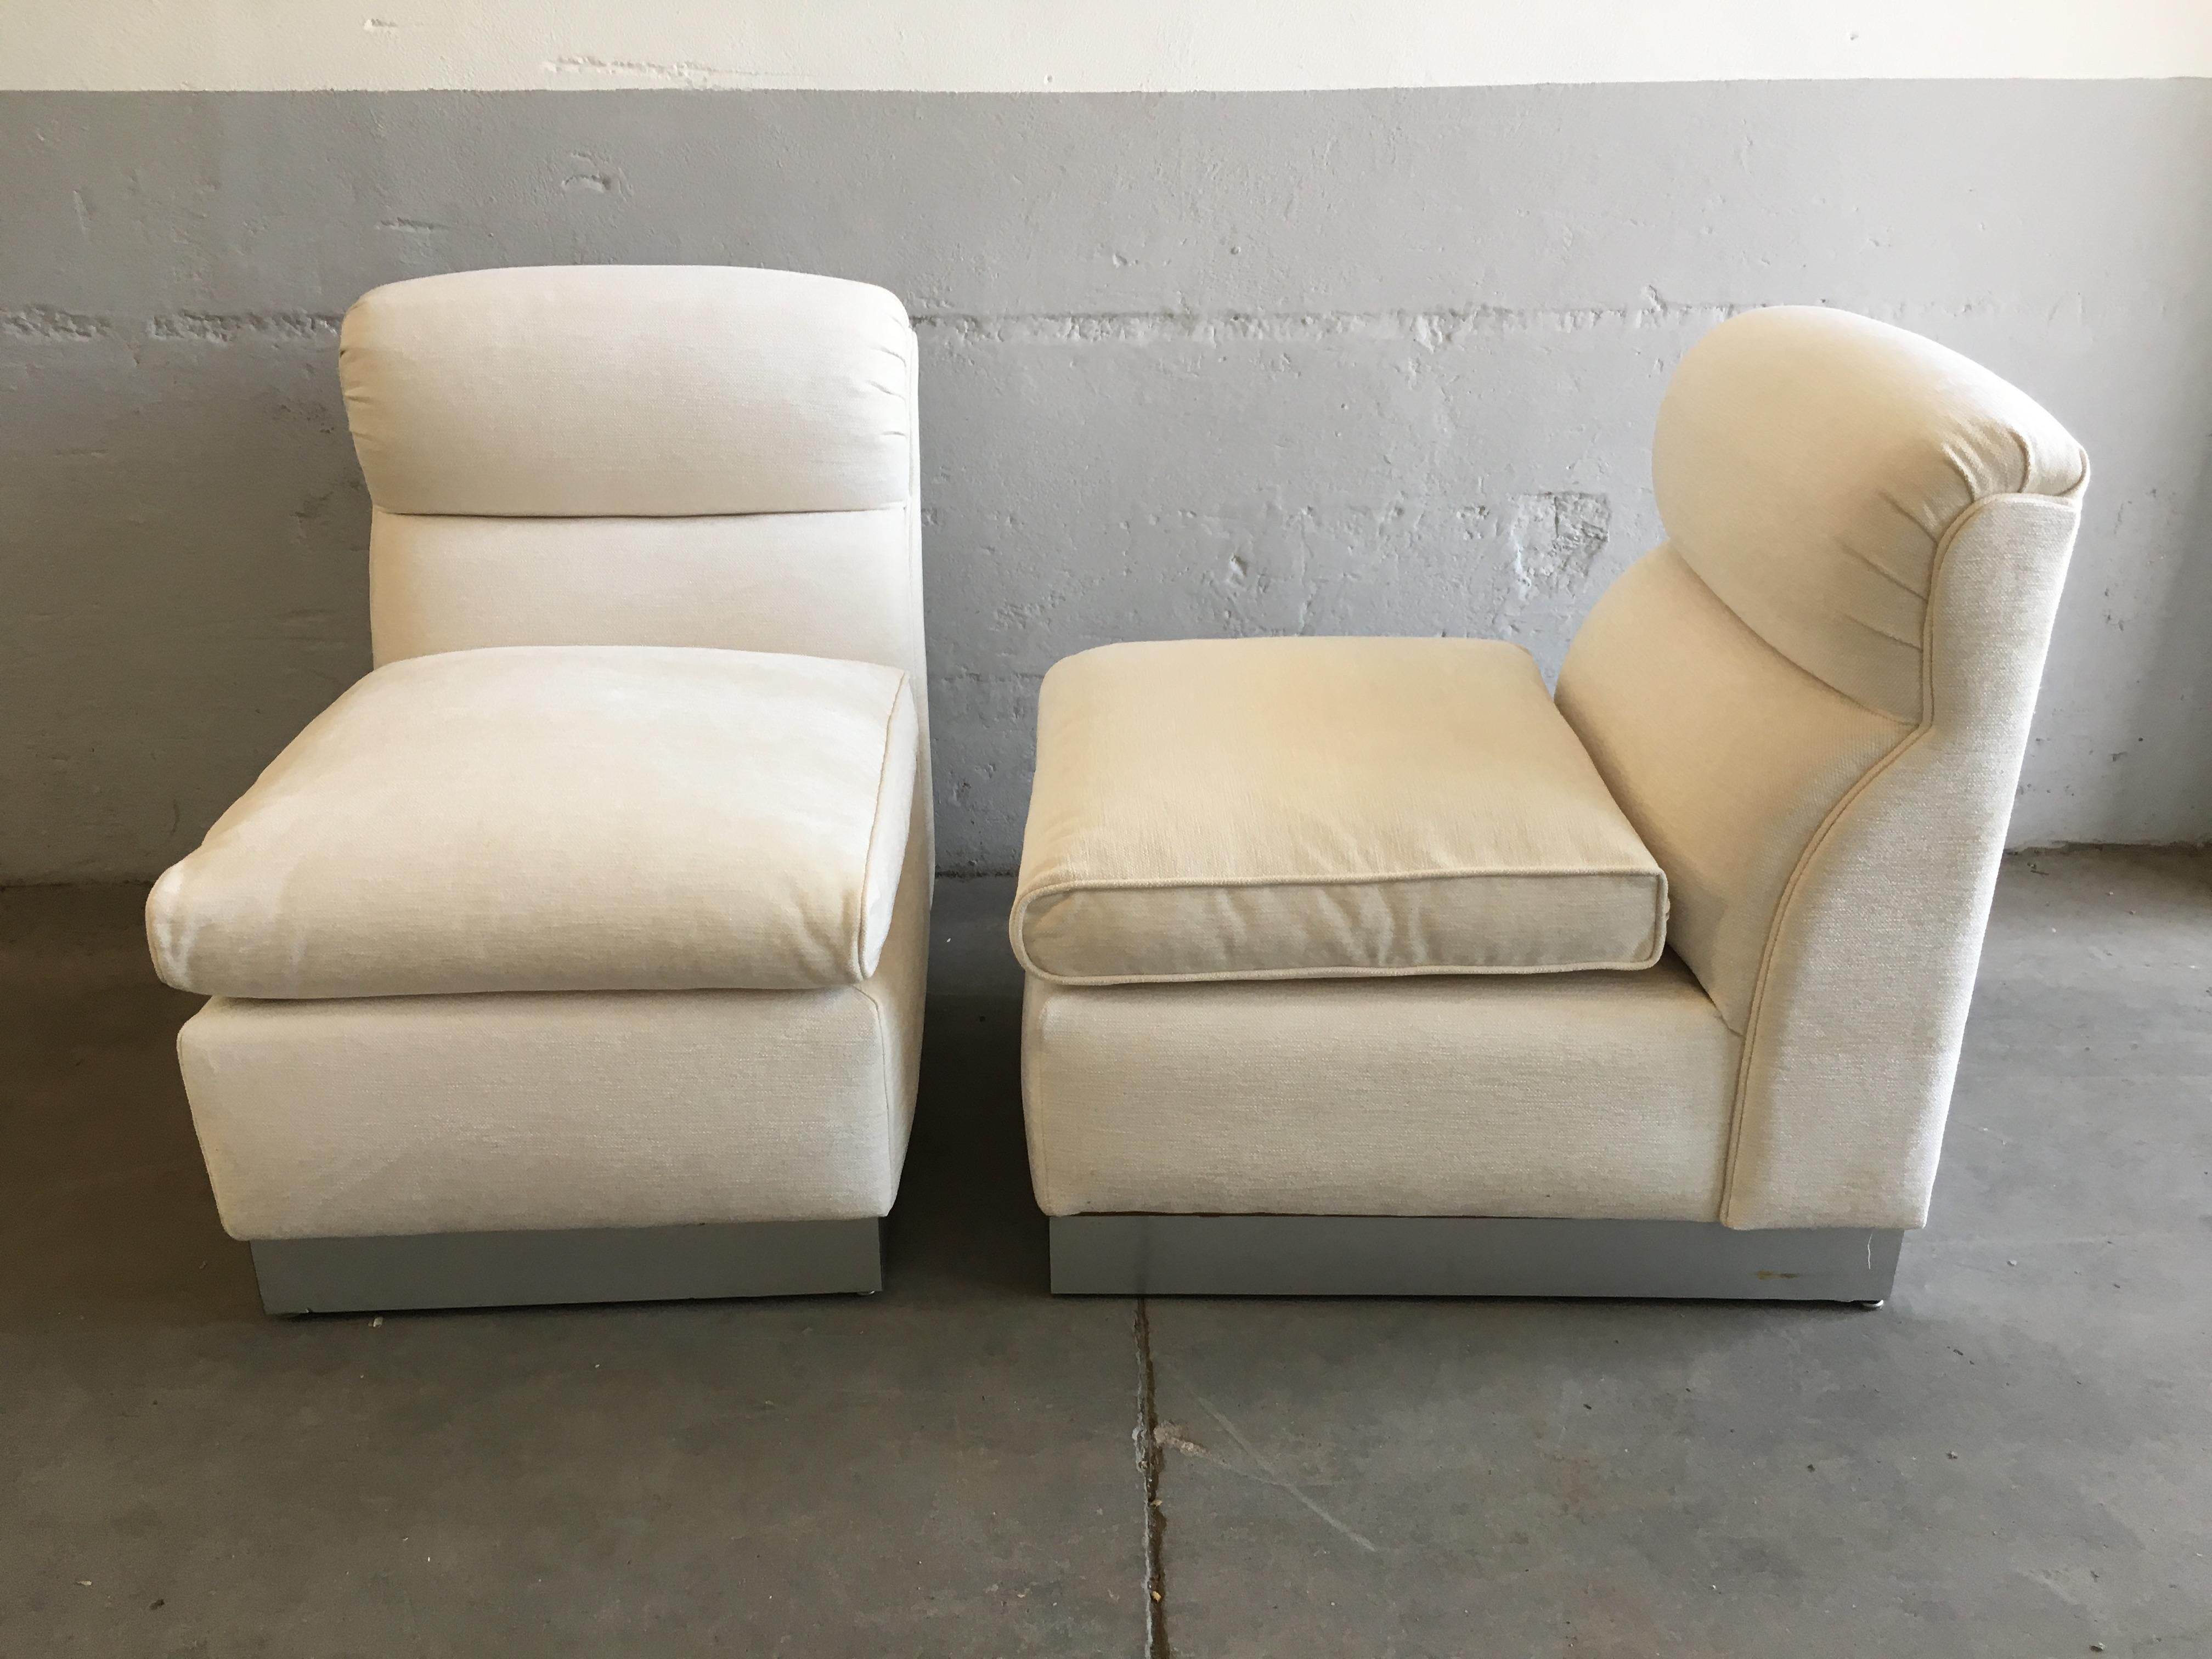 Late 20th Century Mid-Century Modern Italian Pair of Modular Armchairs with Chrome Base, 1970s For Sale